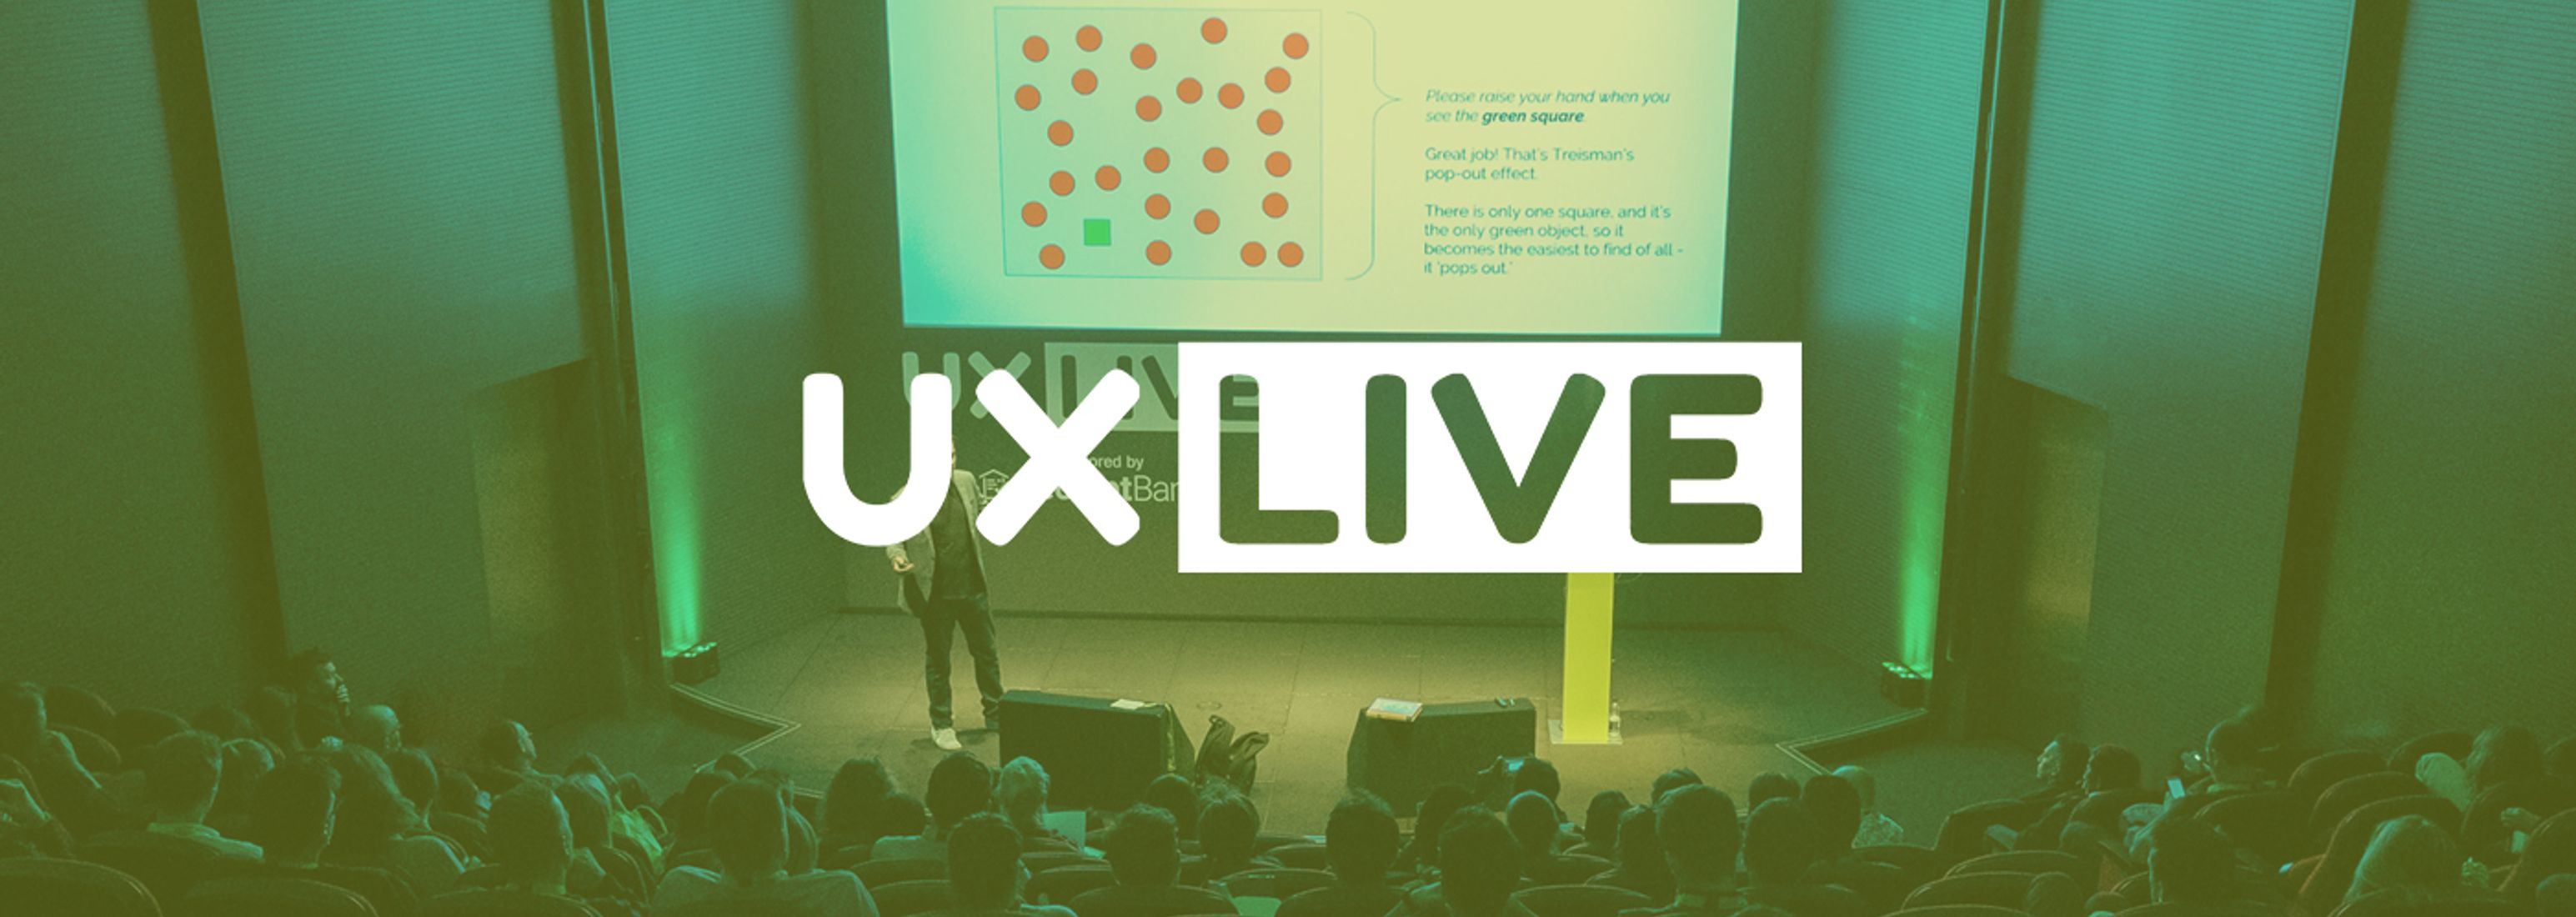 The Ux Live Conference 19 Event Tickets The Dots